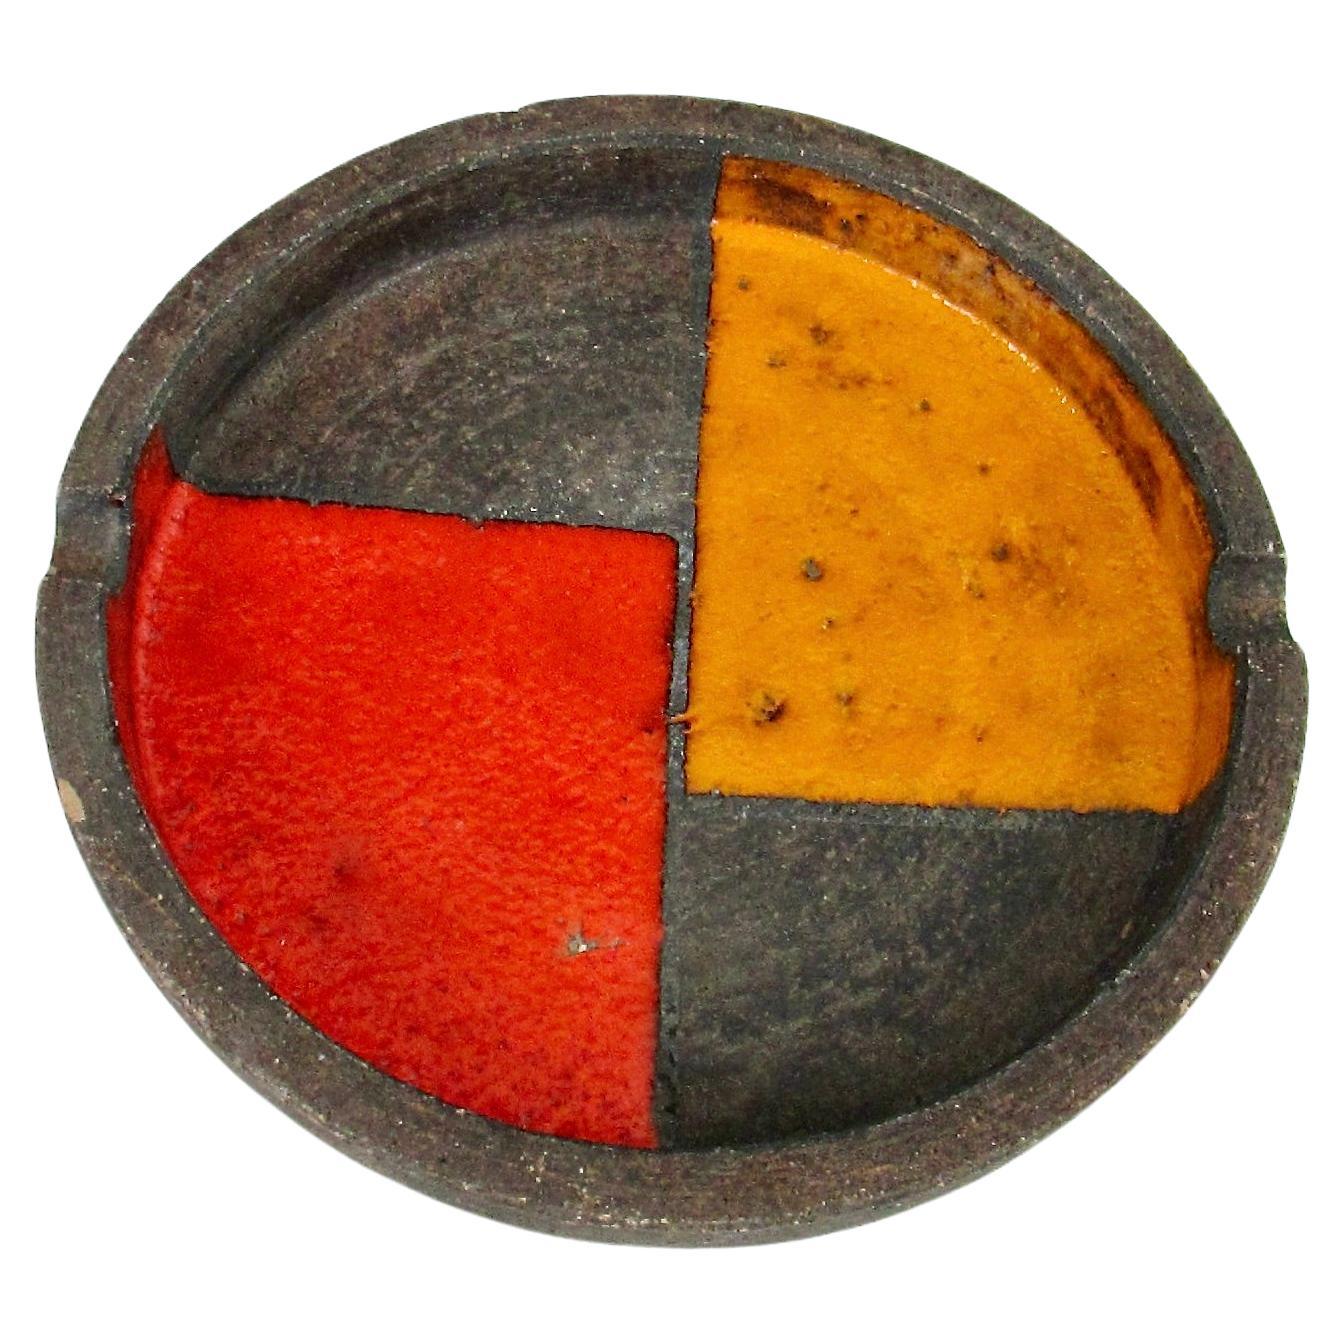 Orange and red round Italian pottery ashtray with chip For Sale